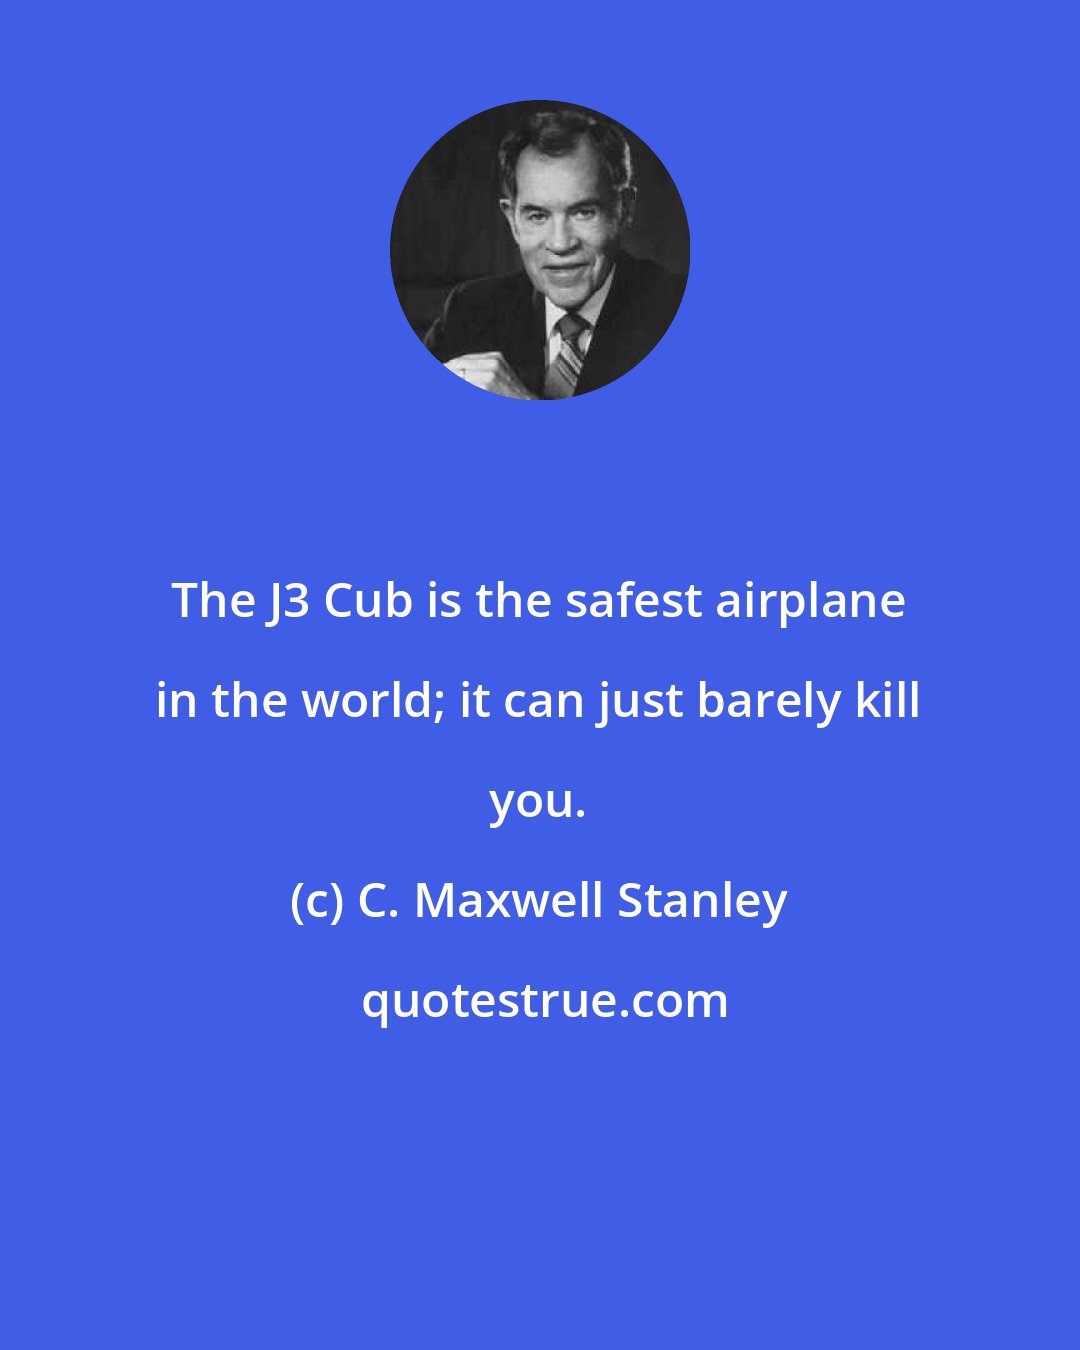 C. Maxwell Stanley: The J3 Cub is the safest airplane in the world; it can just barely kill you.